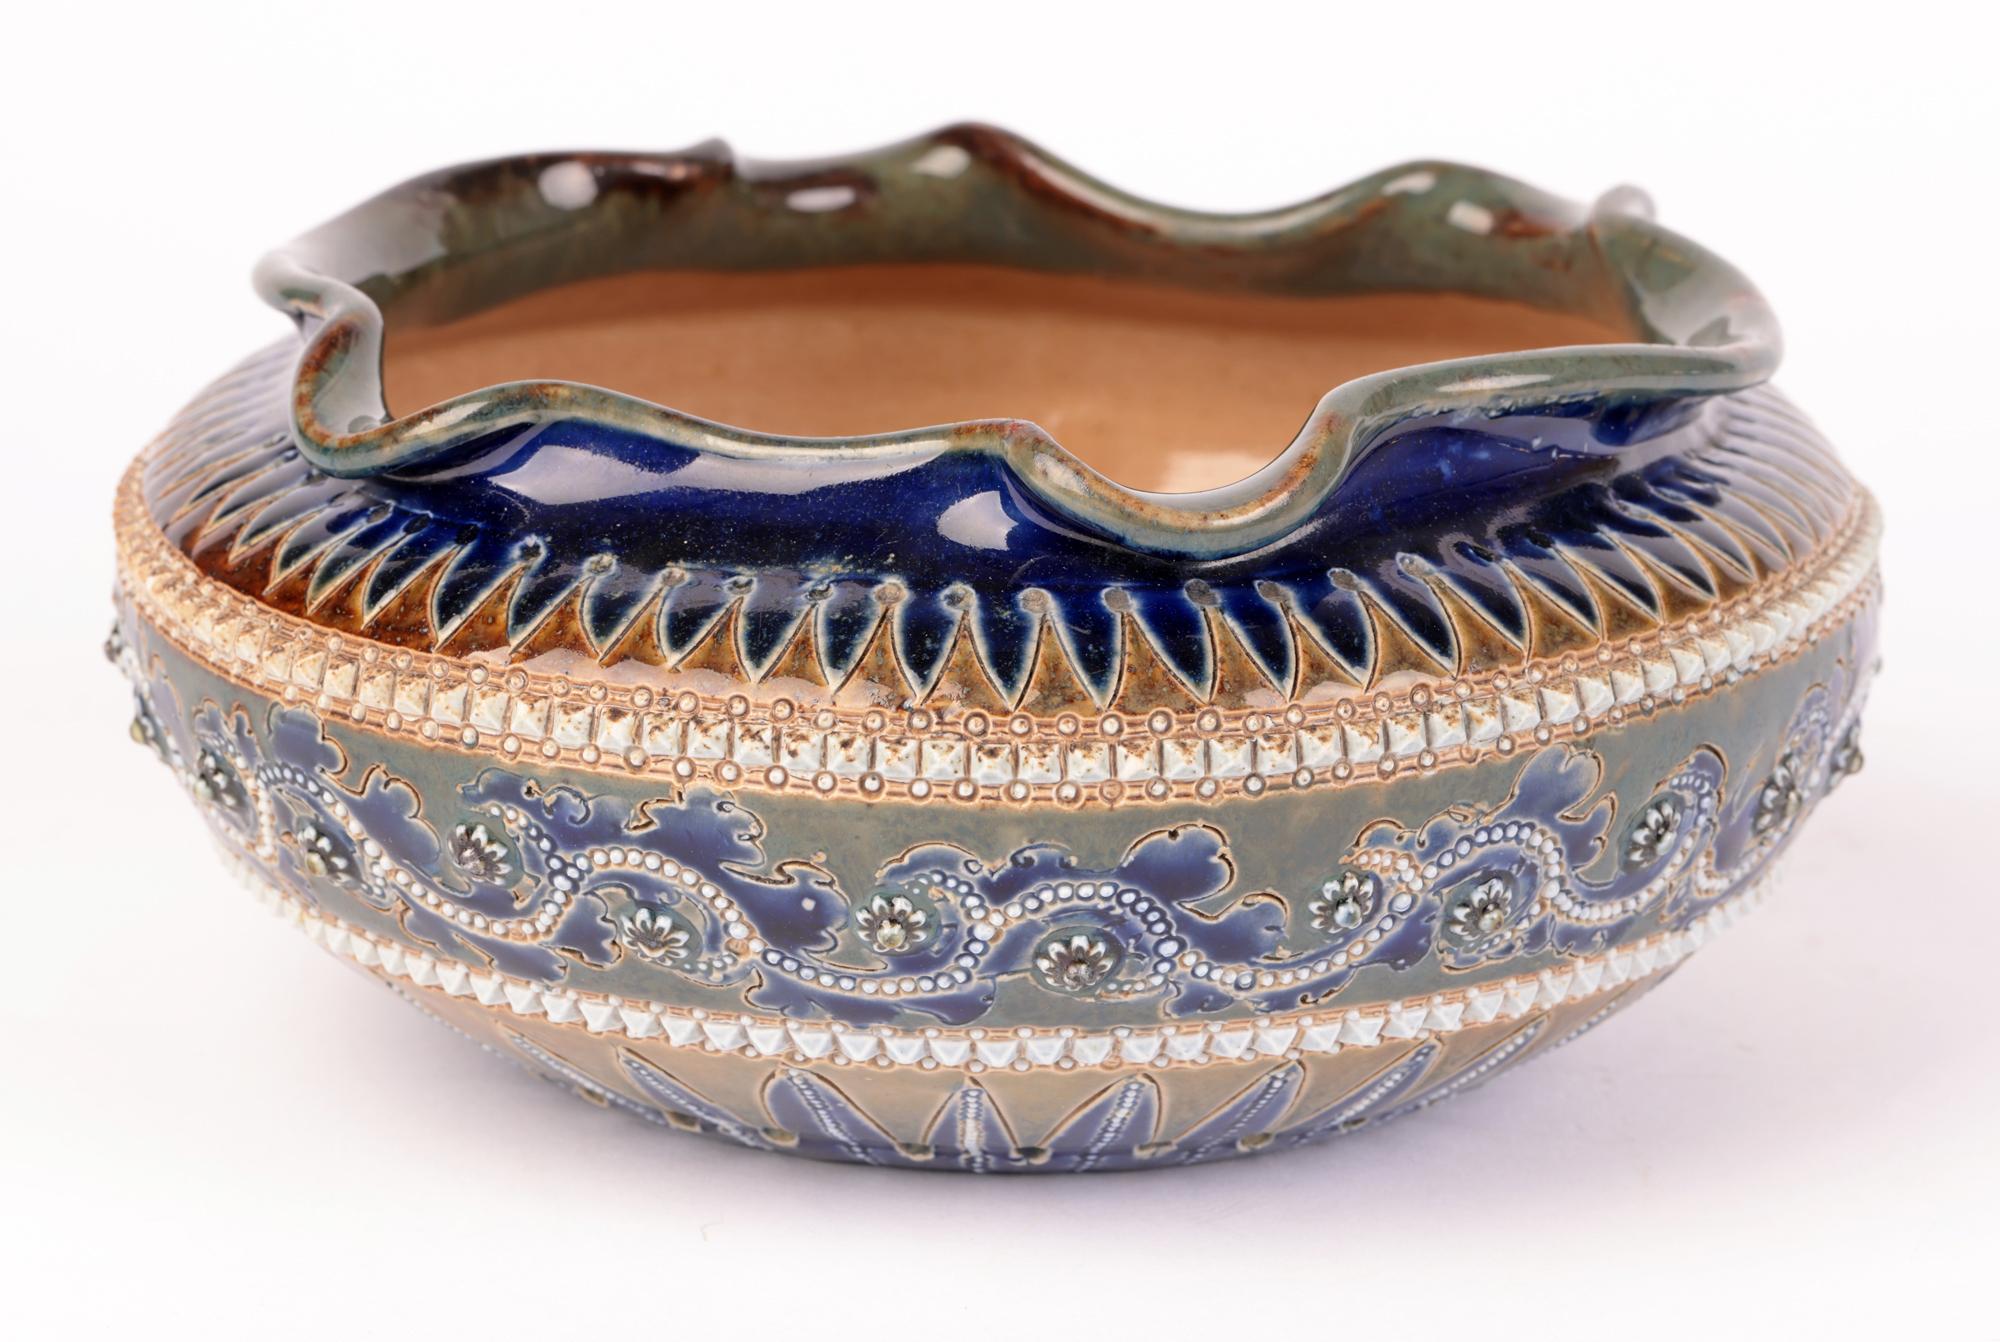 George Tinworth Doulton Lambeth Aesthetic Movement Pottery Bowl, 1879 For Sale 8